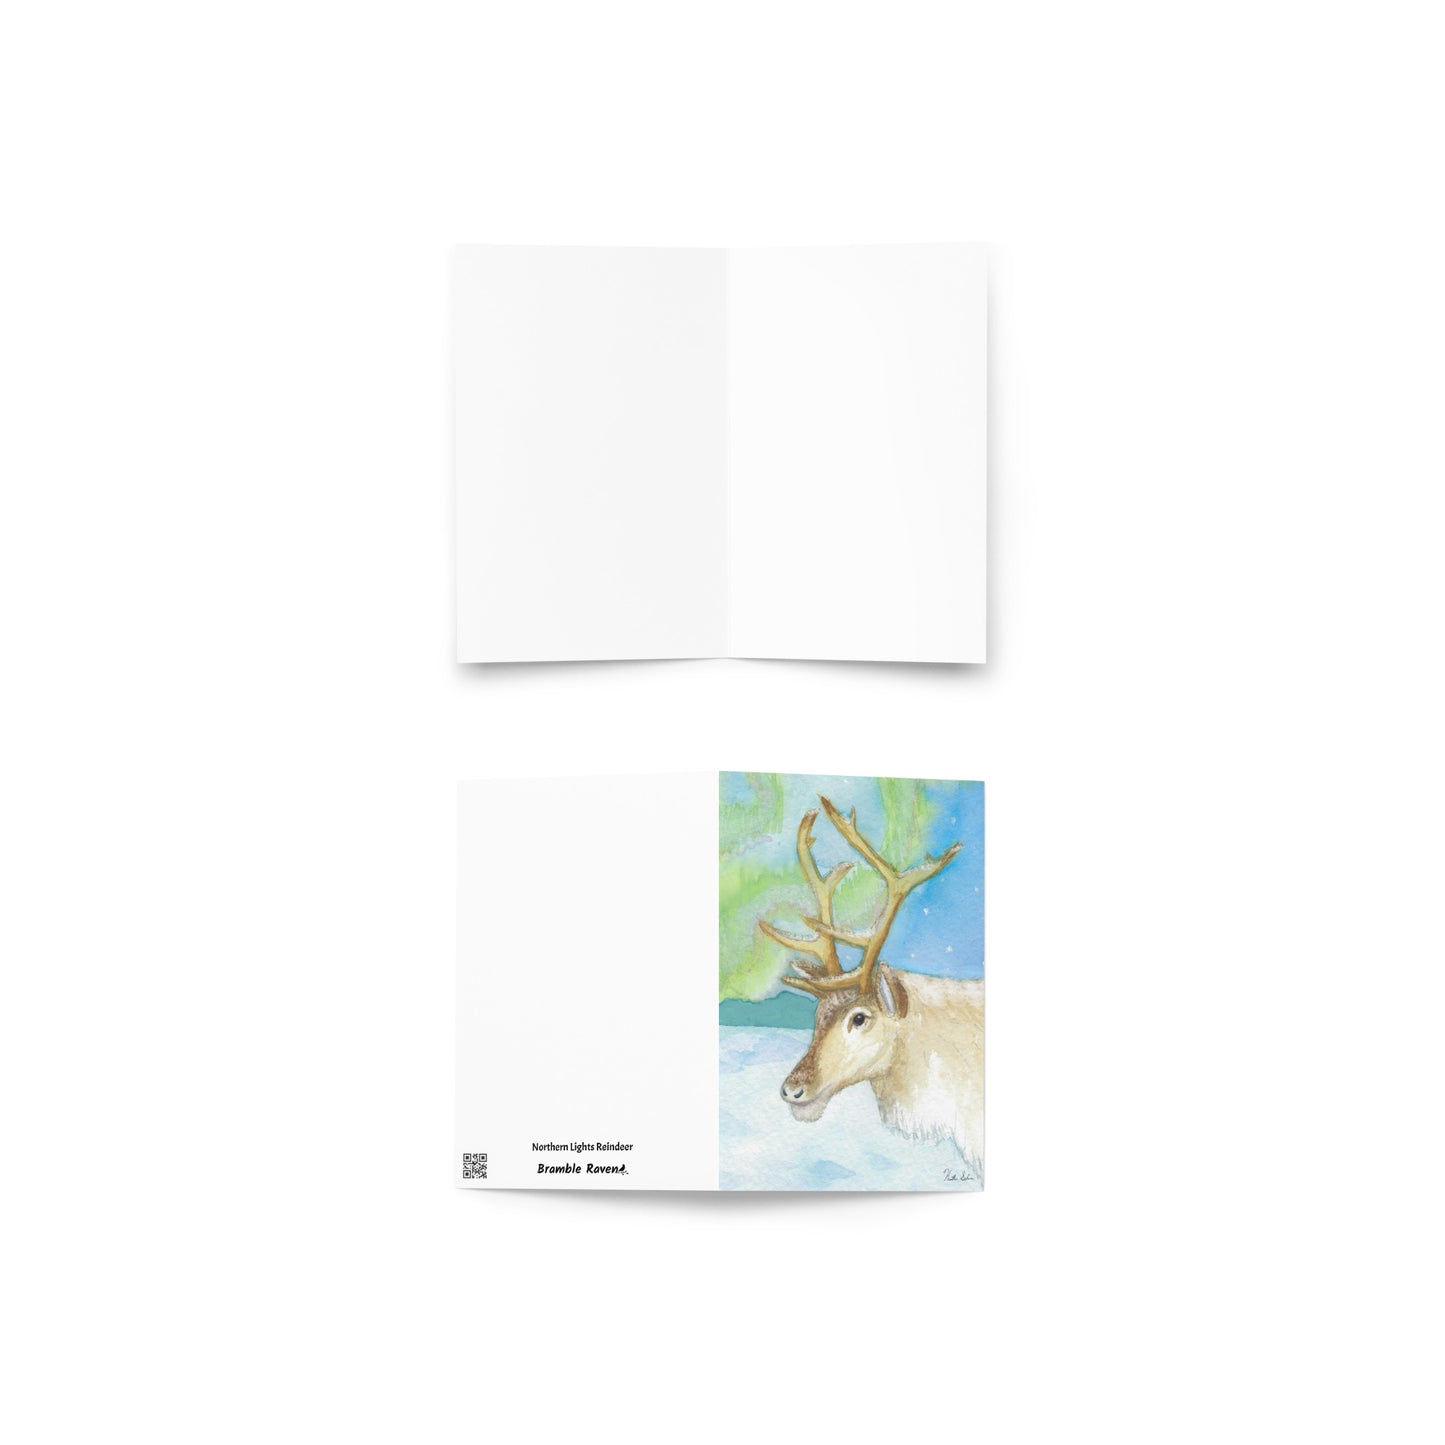 4 x 6 inch greeting card. Features watercolor print of a reindeer in the snow with northern lights in the sky. Blank inside. Comes with a white envelope. Shows front and back cover, and blank inside.